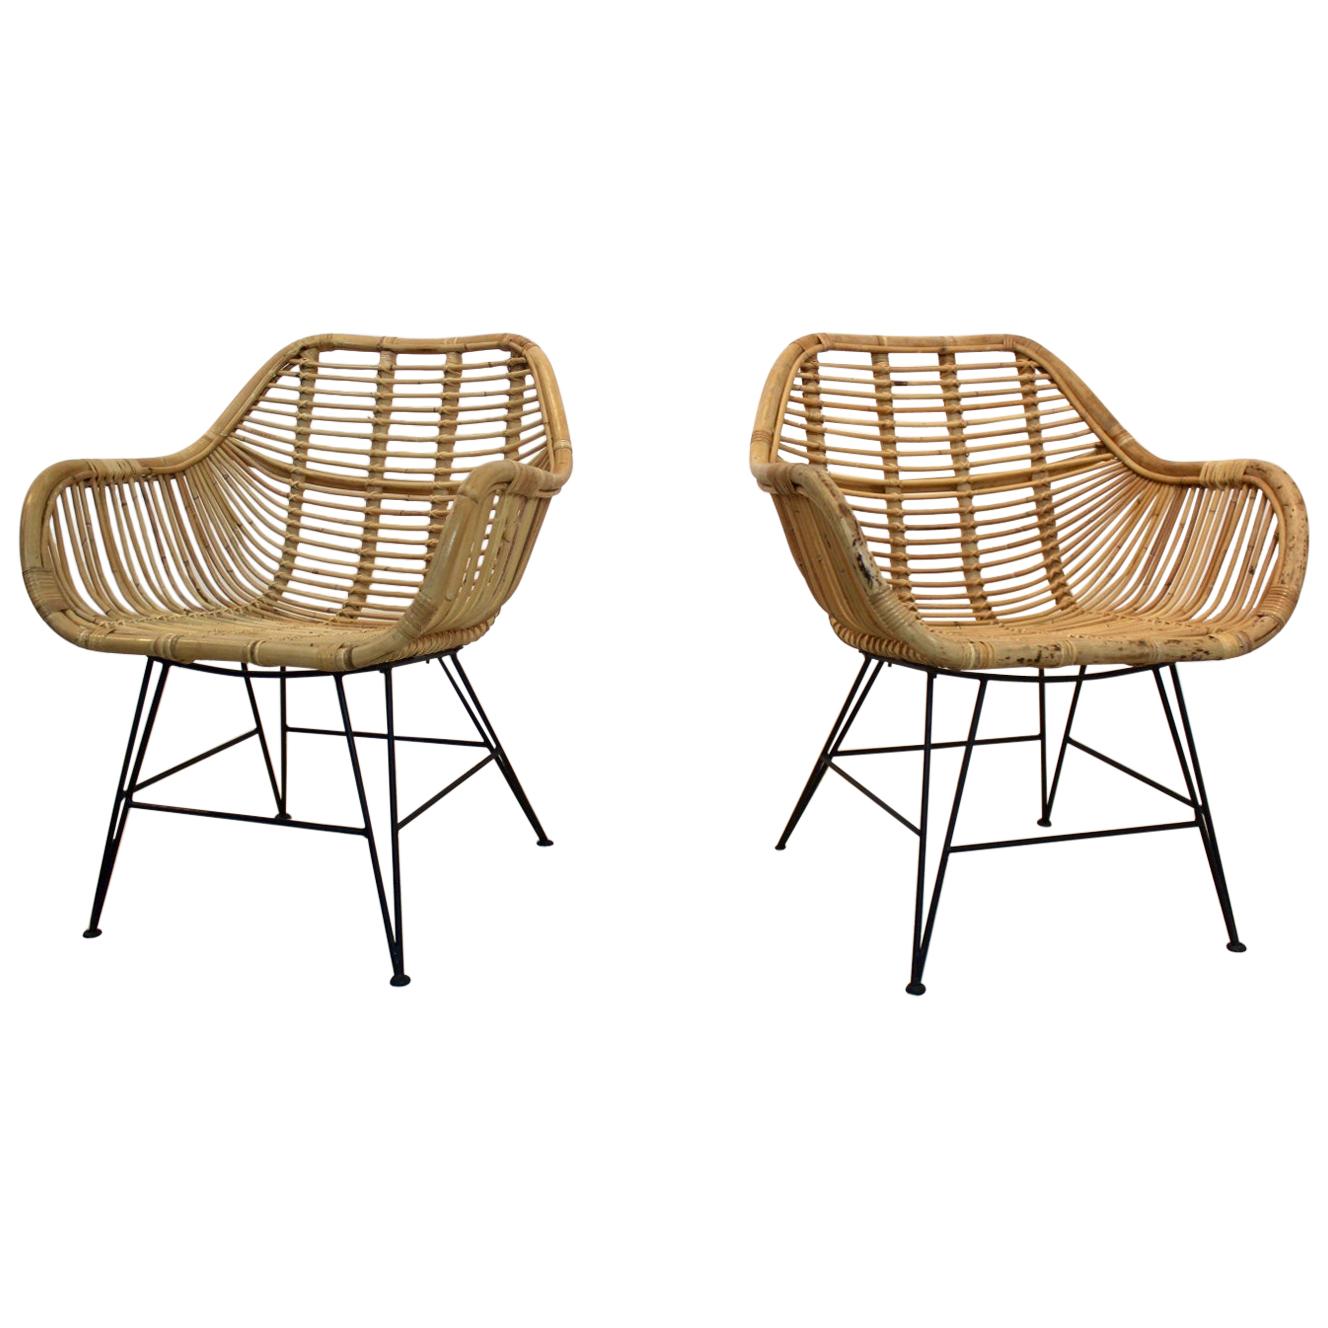 Gorgeous Dutch Wicker and Steel Chairs For Sale